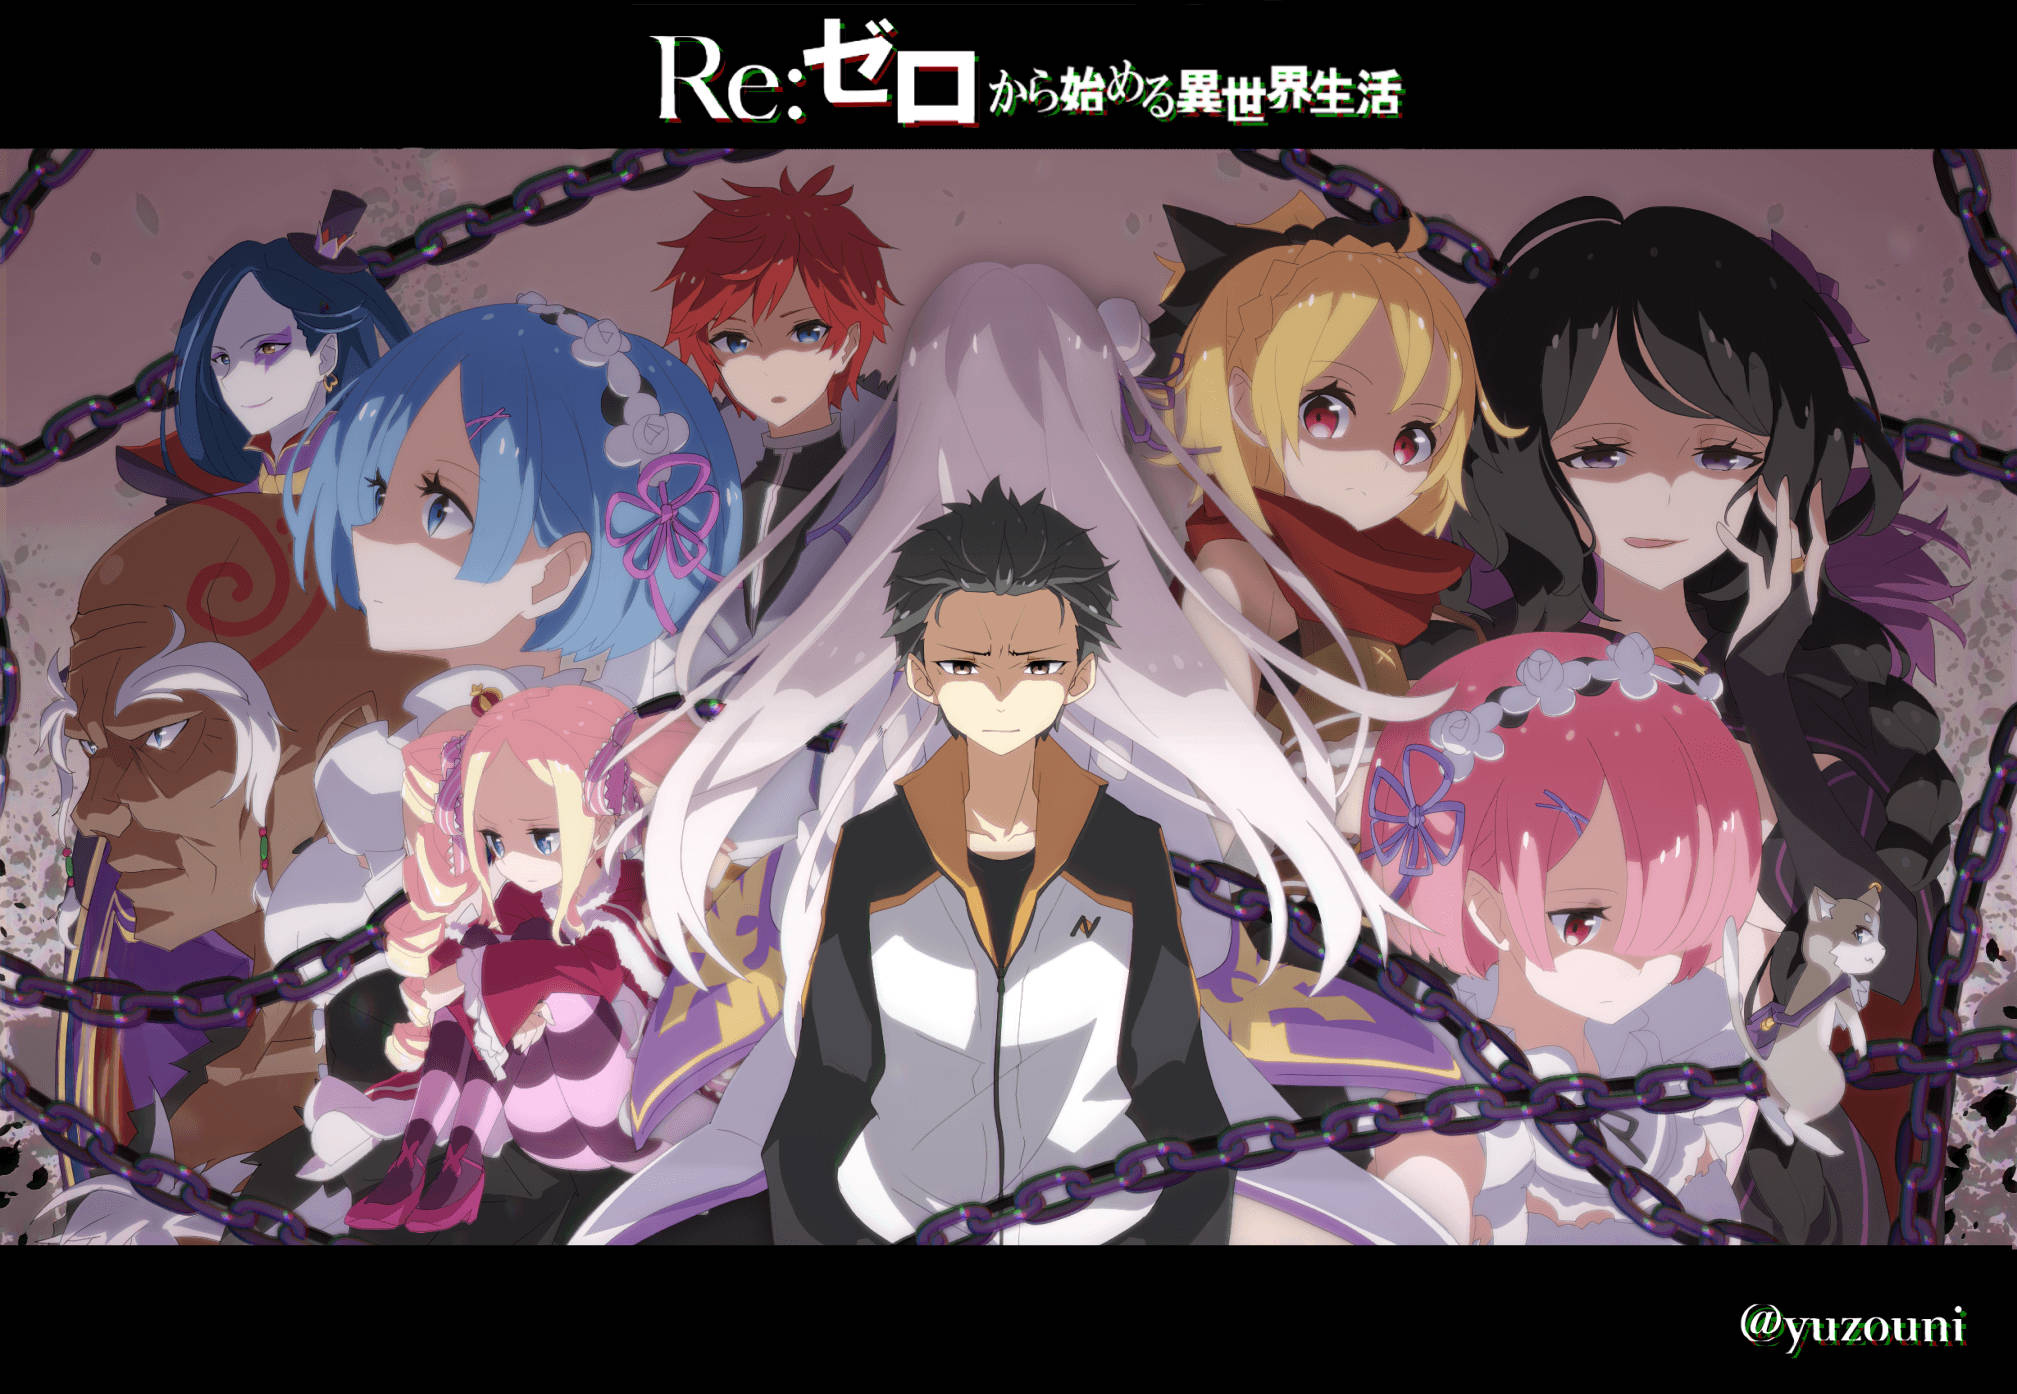 Awesome Hd Anime Cover Of Re Zero Background